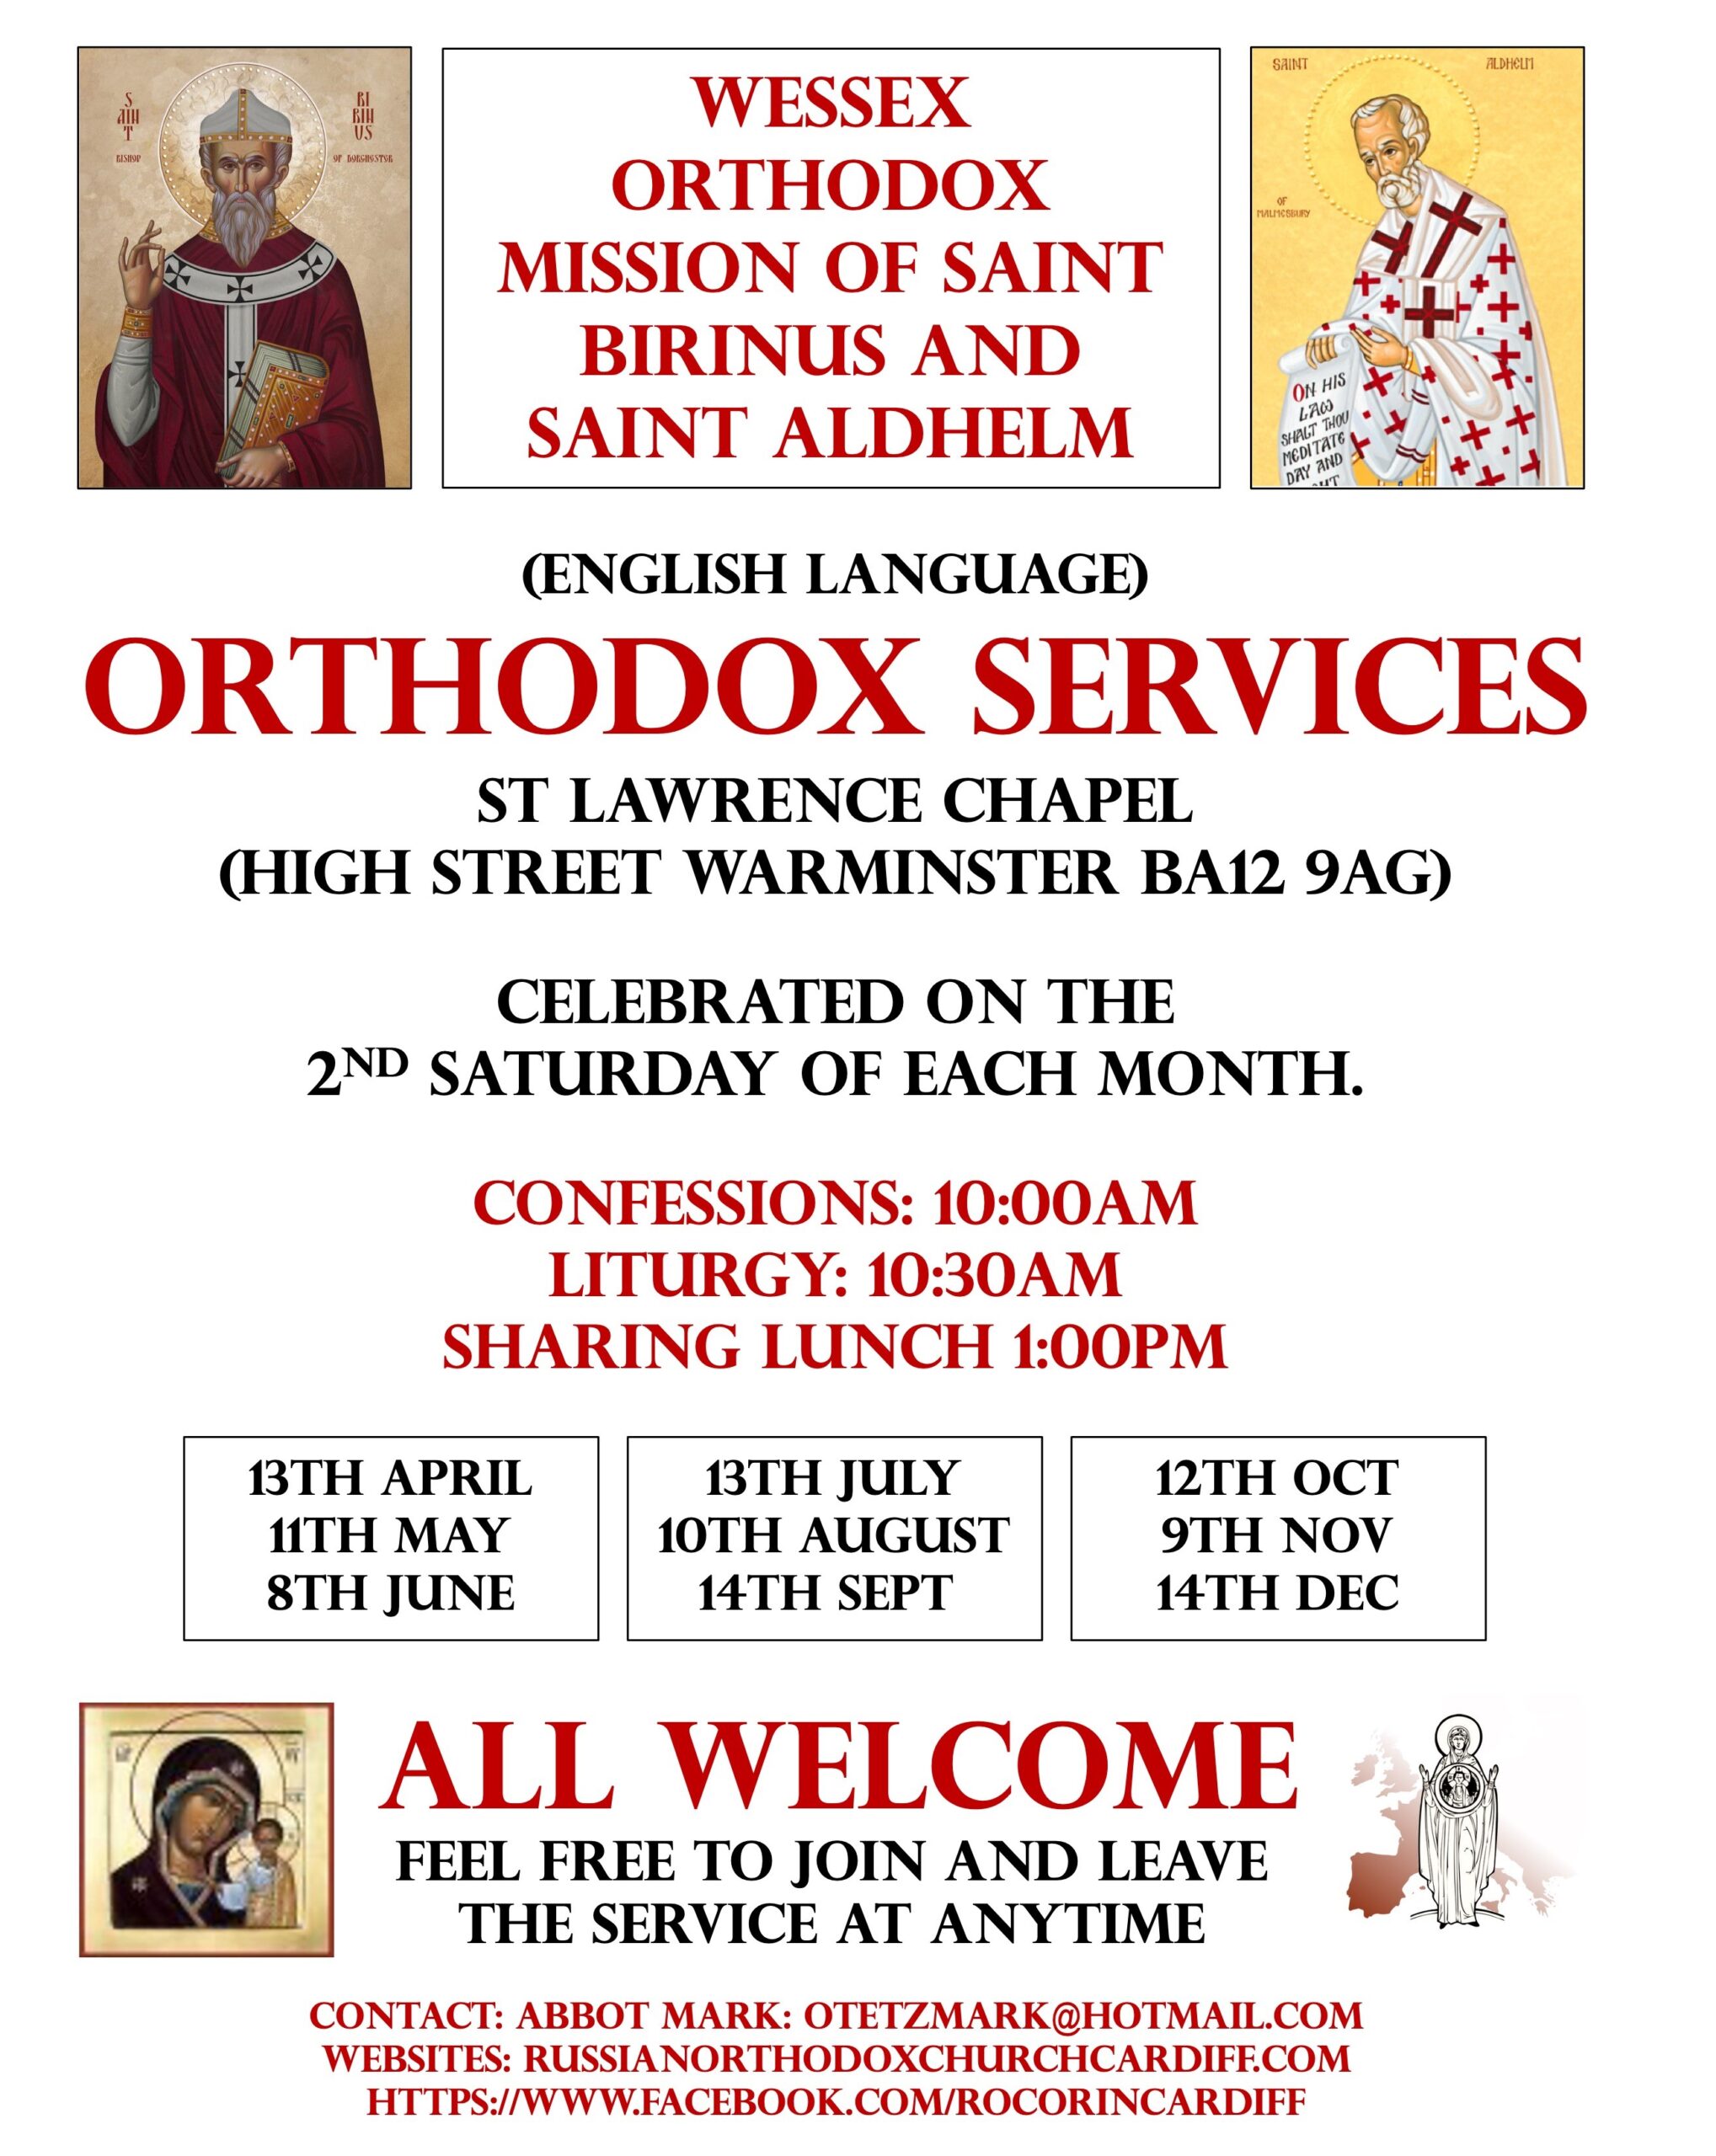 English language Orthodox Services for the local community